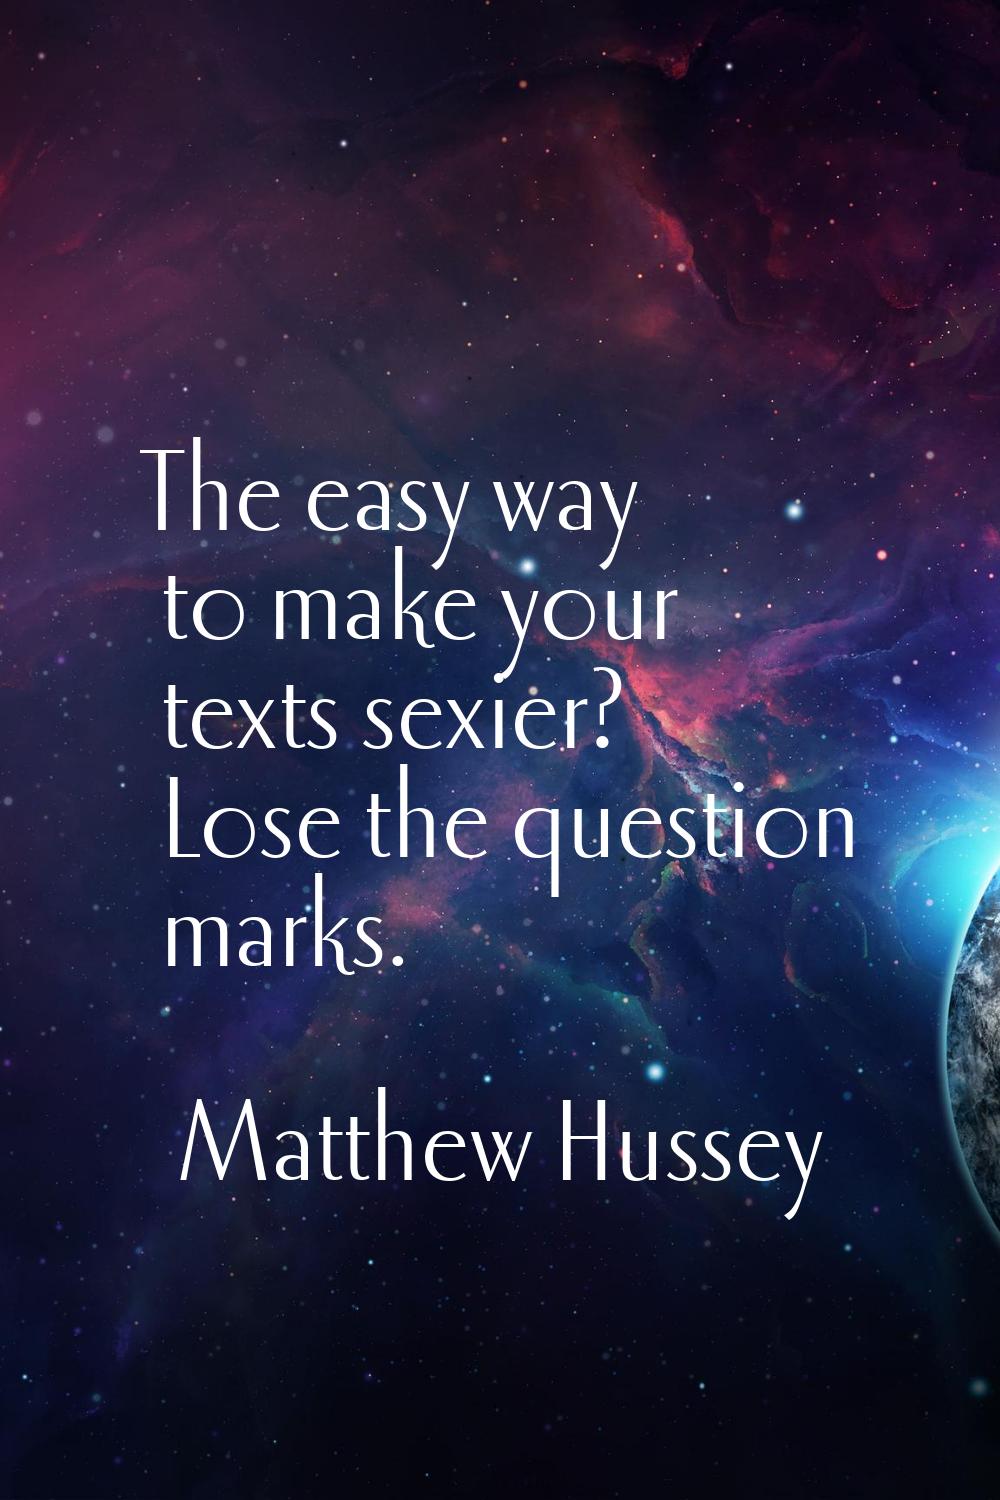 The easy way to make your texts sexier? Lose the question marks.